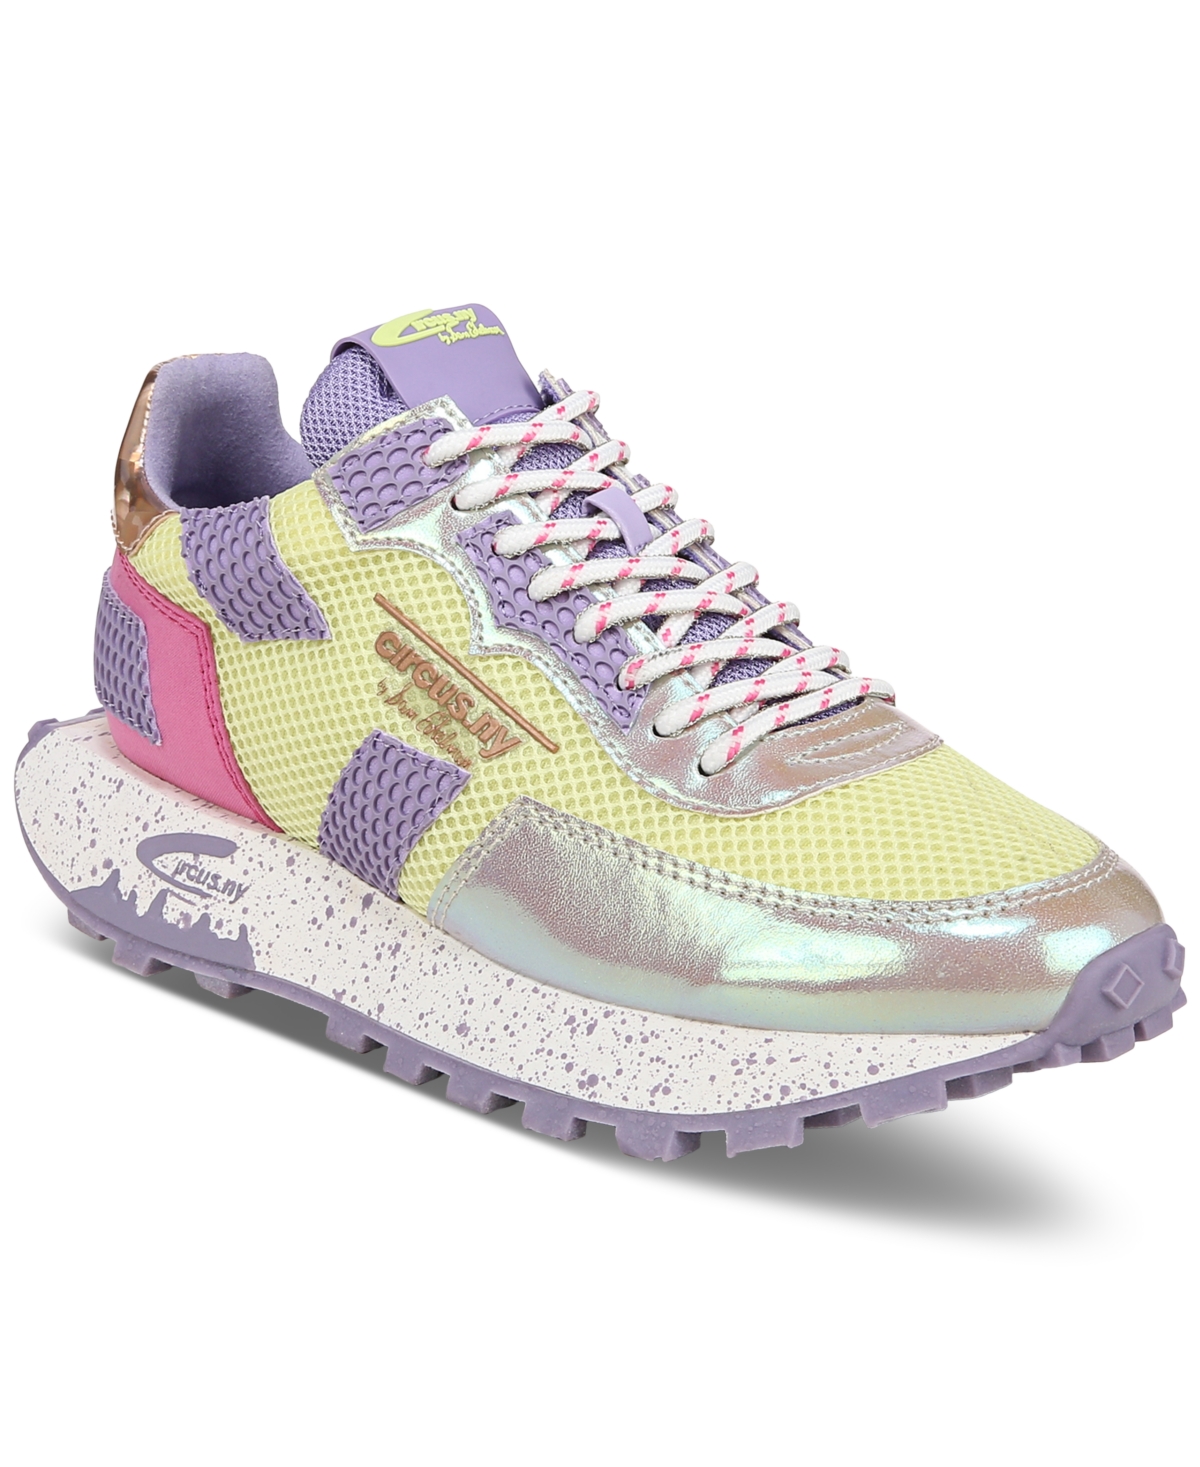 Circus Ny By Sam Edelman Circus Ny Devyn Lace-up Jogger Sneakers In Yellow,purple,pink